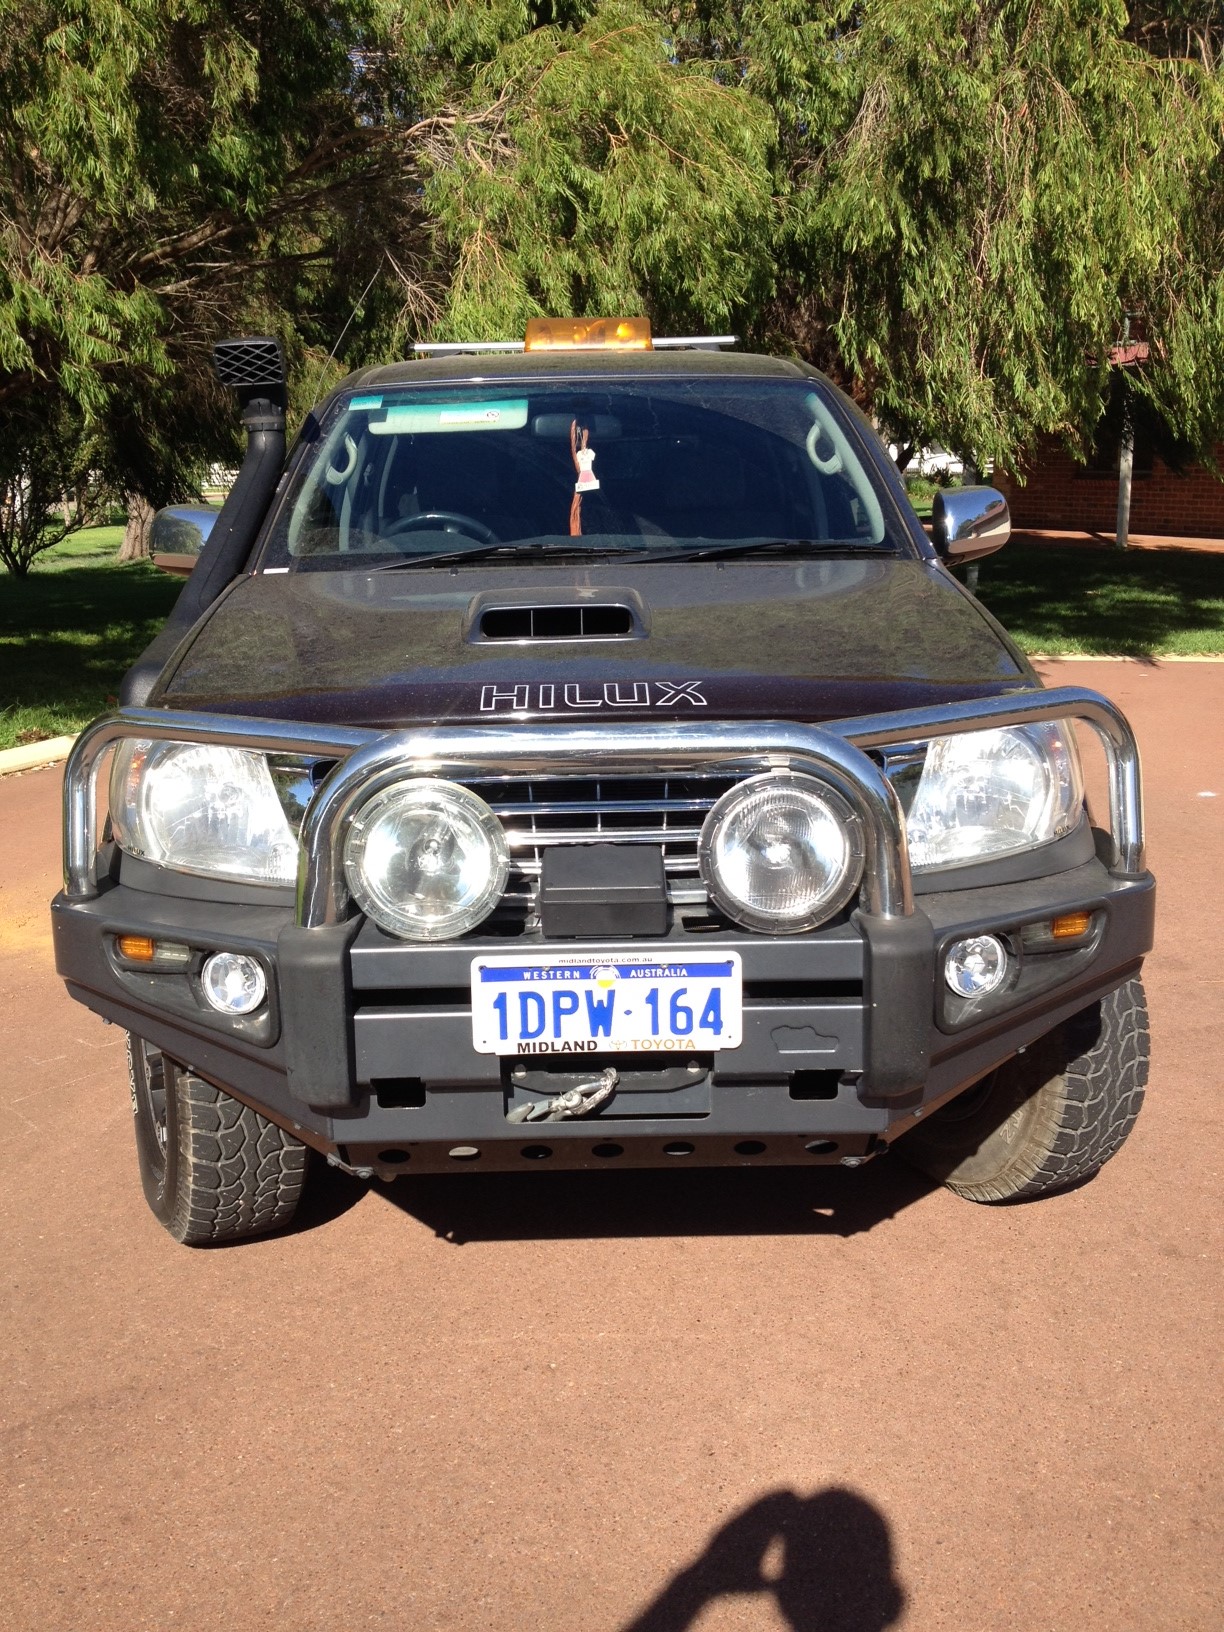 used toyota hilux for sale in perth wa #2